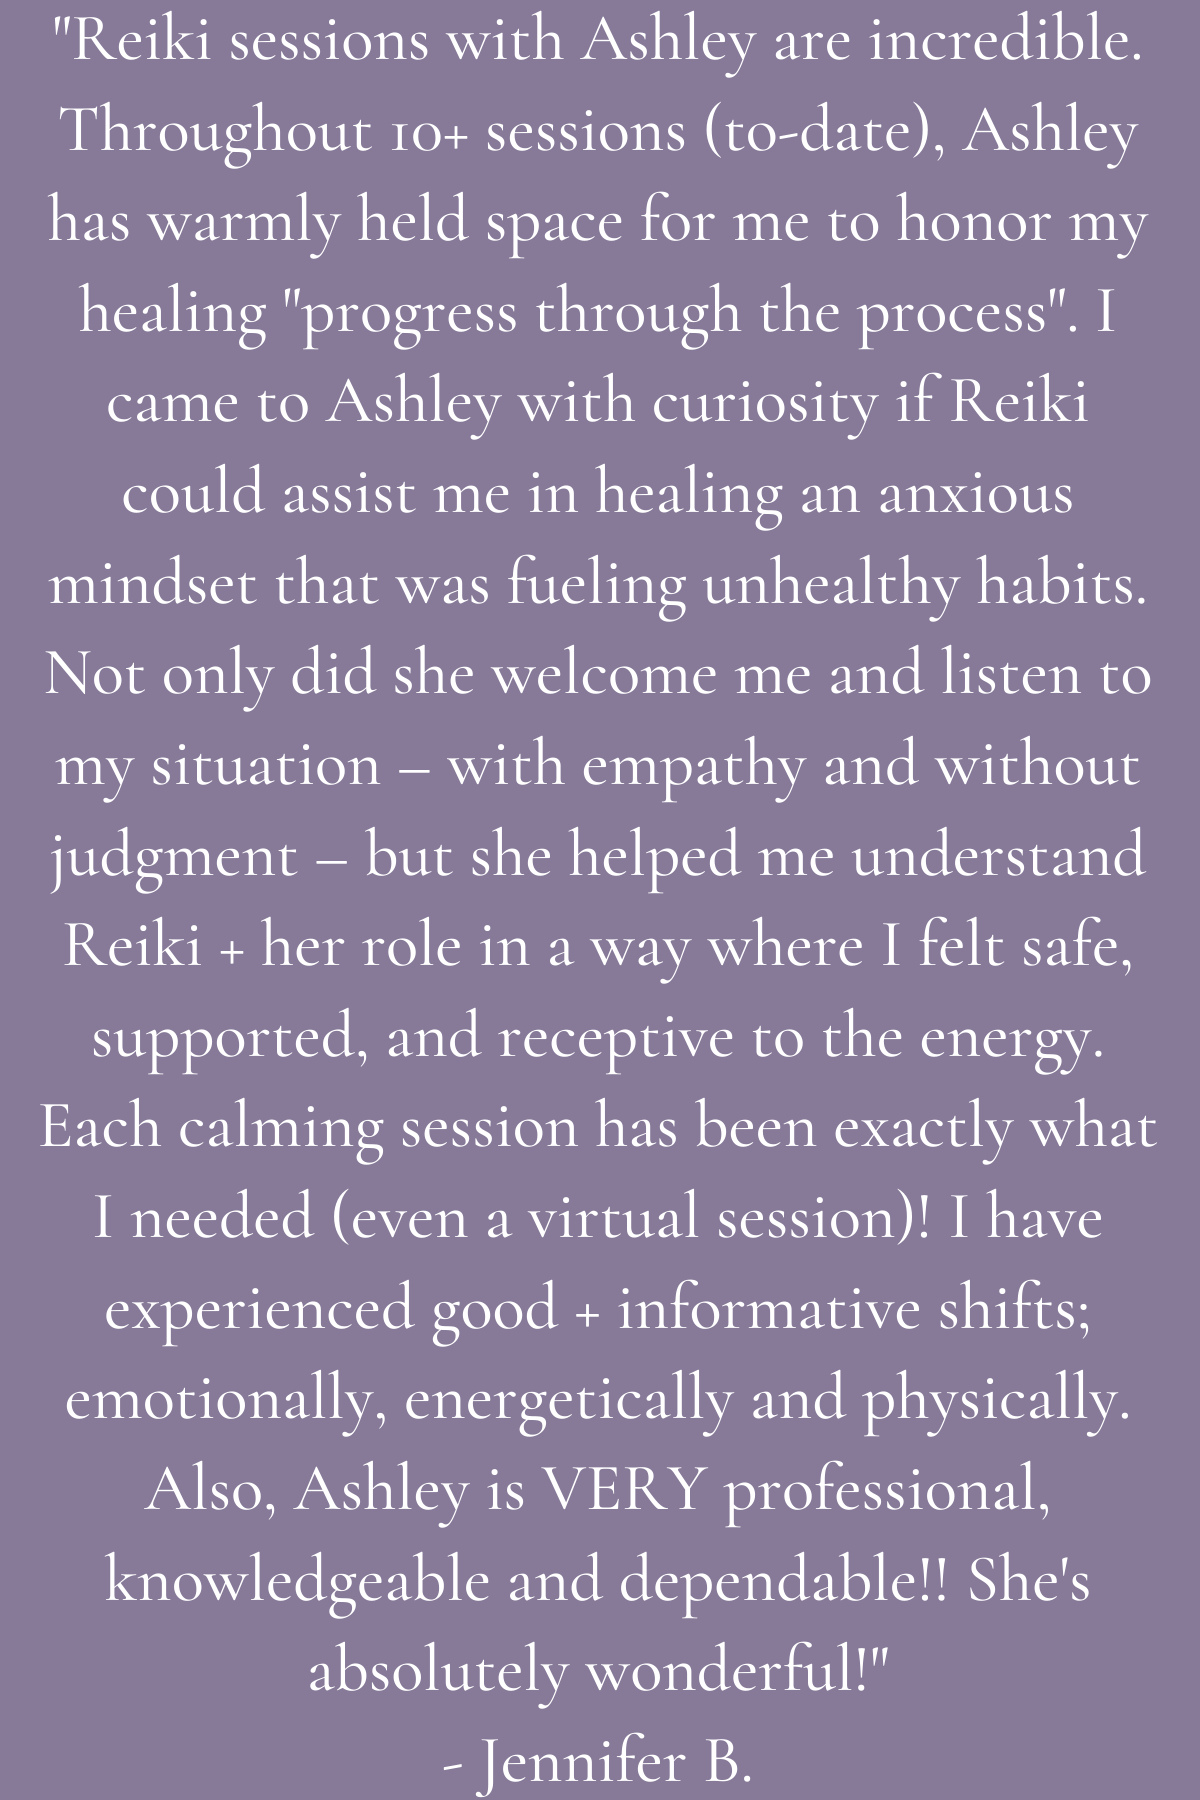 _Reiki sessions with Ashley are incredible. Throughout 10+ sessions (to-date), Ashley has warmly held space for me to honor my healing _progress through the process_. I came to Ashley with curiosity if Reiki could as.png